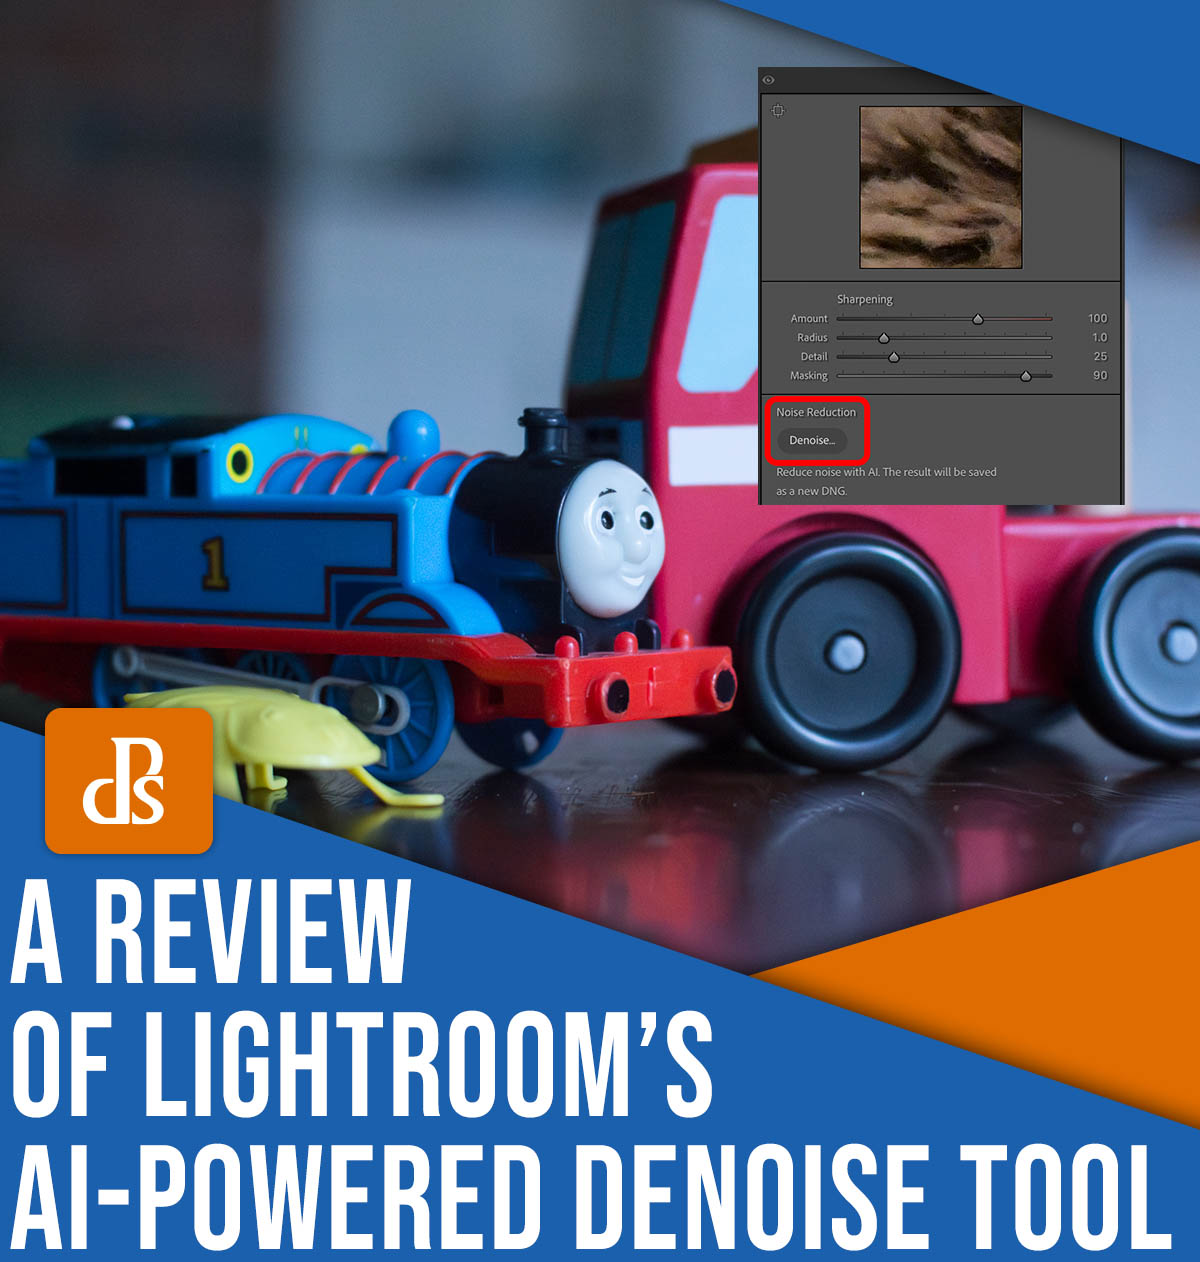 A review of Lightroom's AI-powered Denoise tool